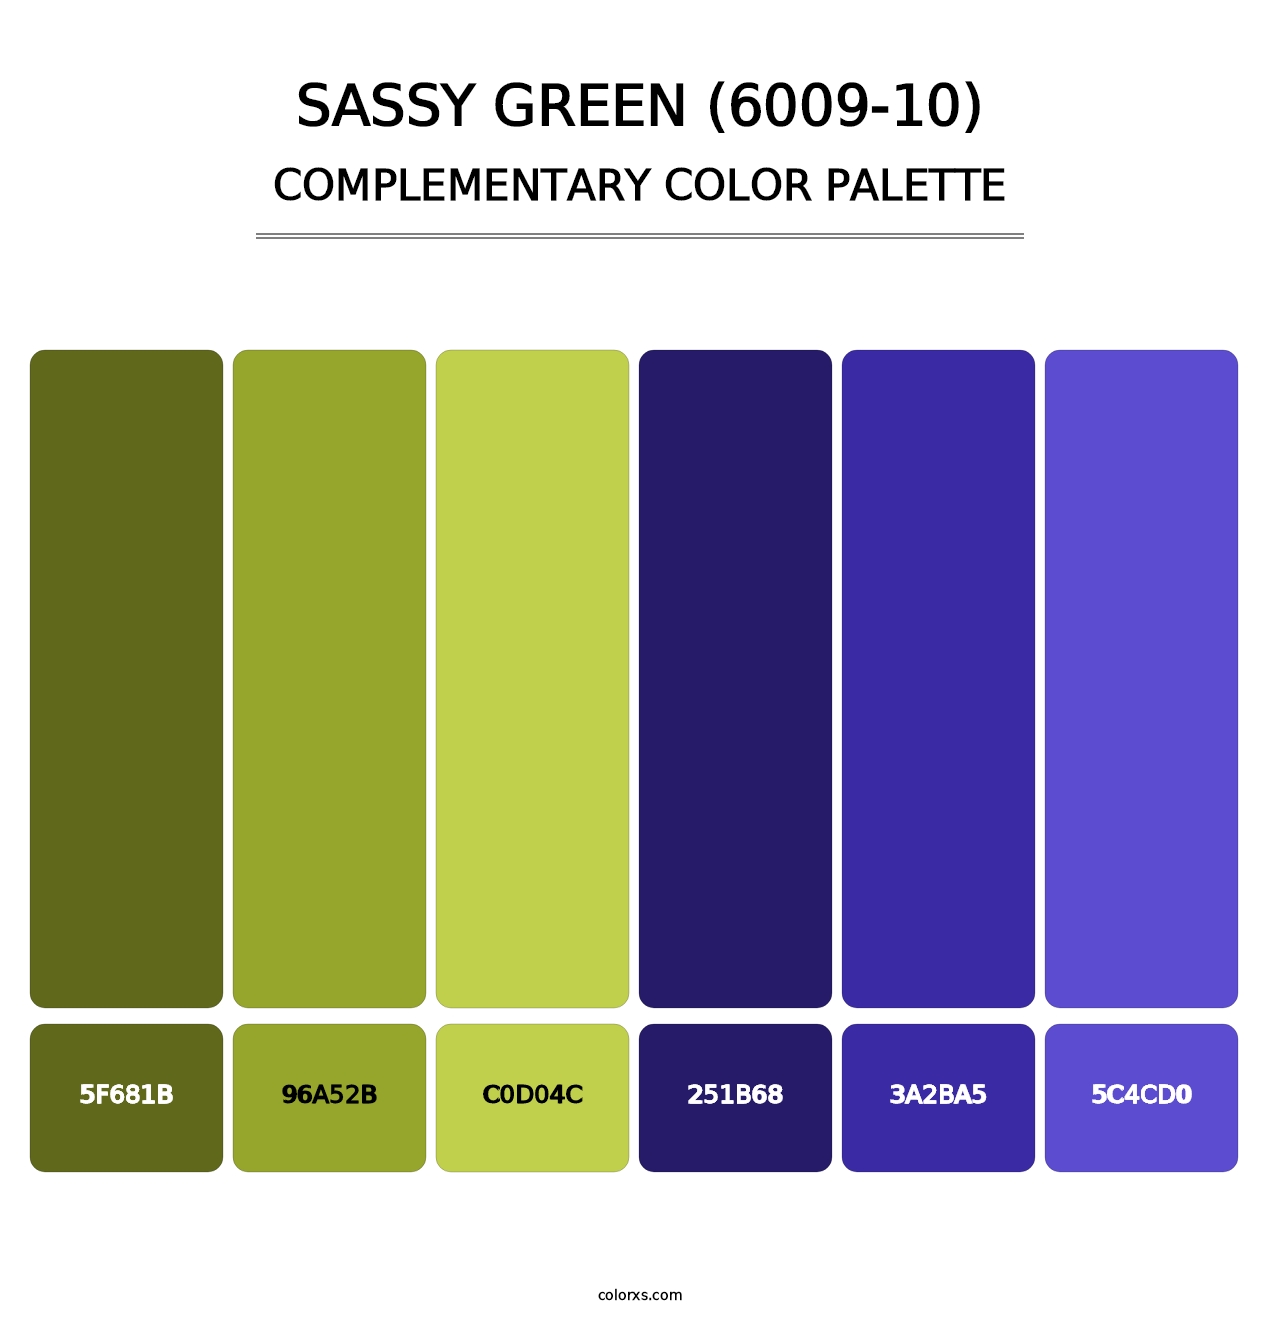 Sassy Green (6009-10) - Complementary Color Palette